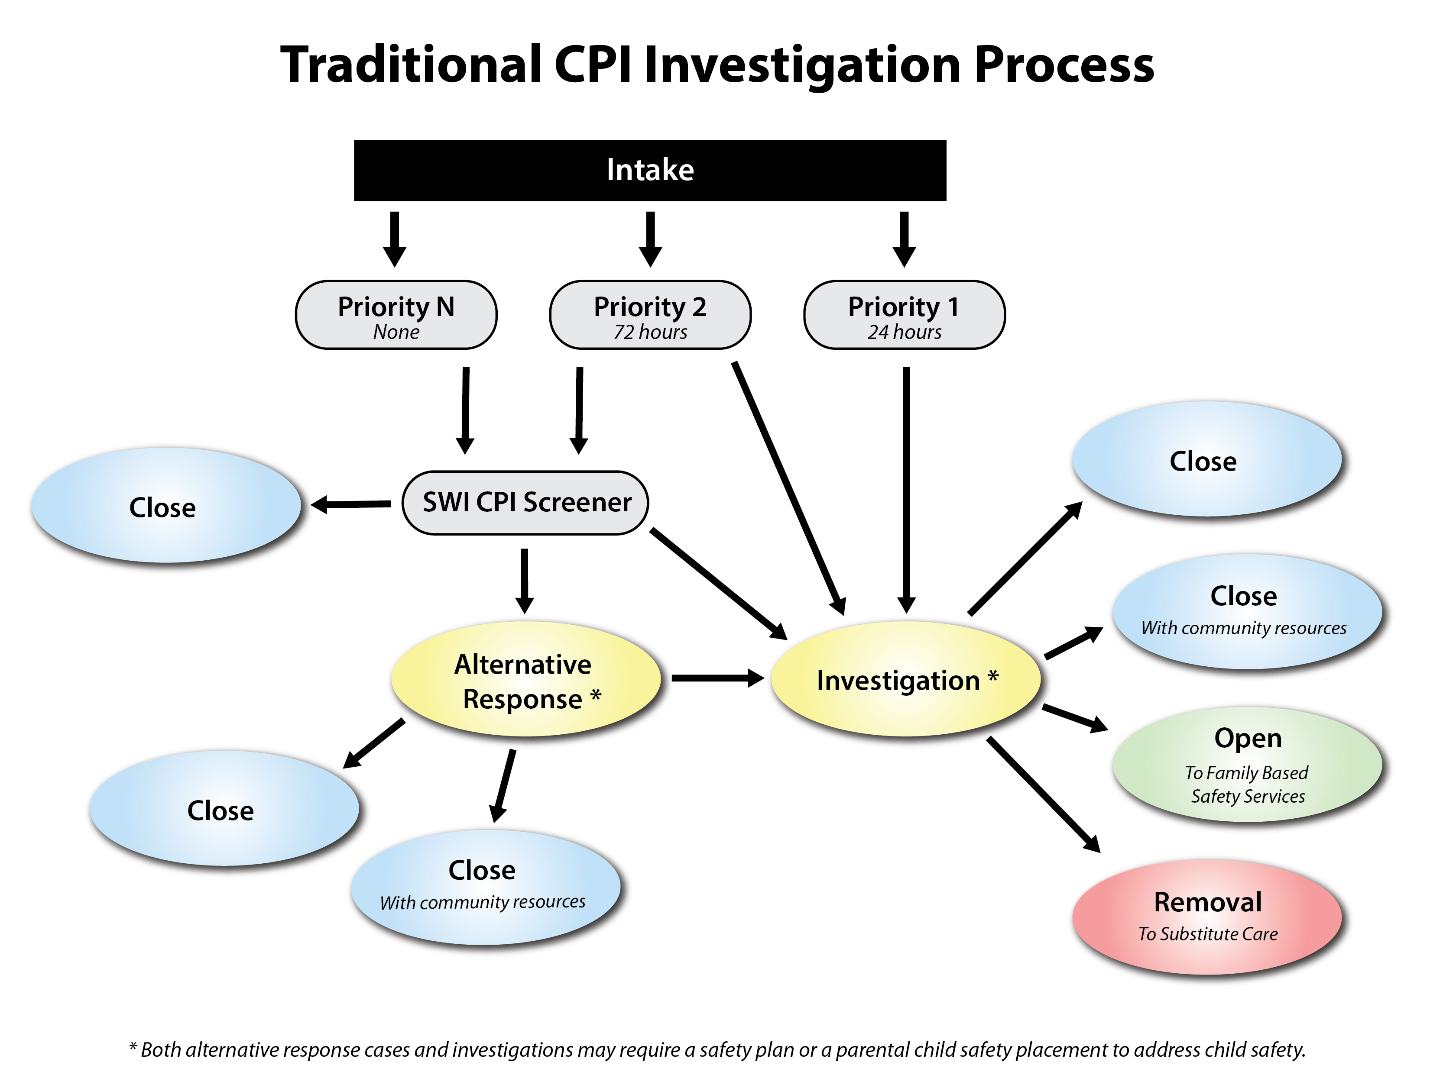 Traditional Investigations process diagram: Priority 1 (24 hours) and Priority 2 (72 hours) can go to Investigations, which then leads to close, family-based-services, or removal to substitute care.